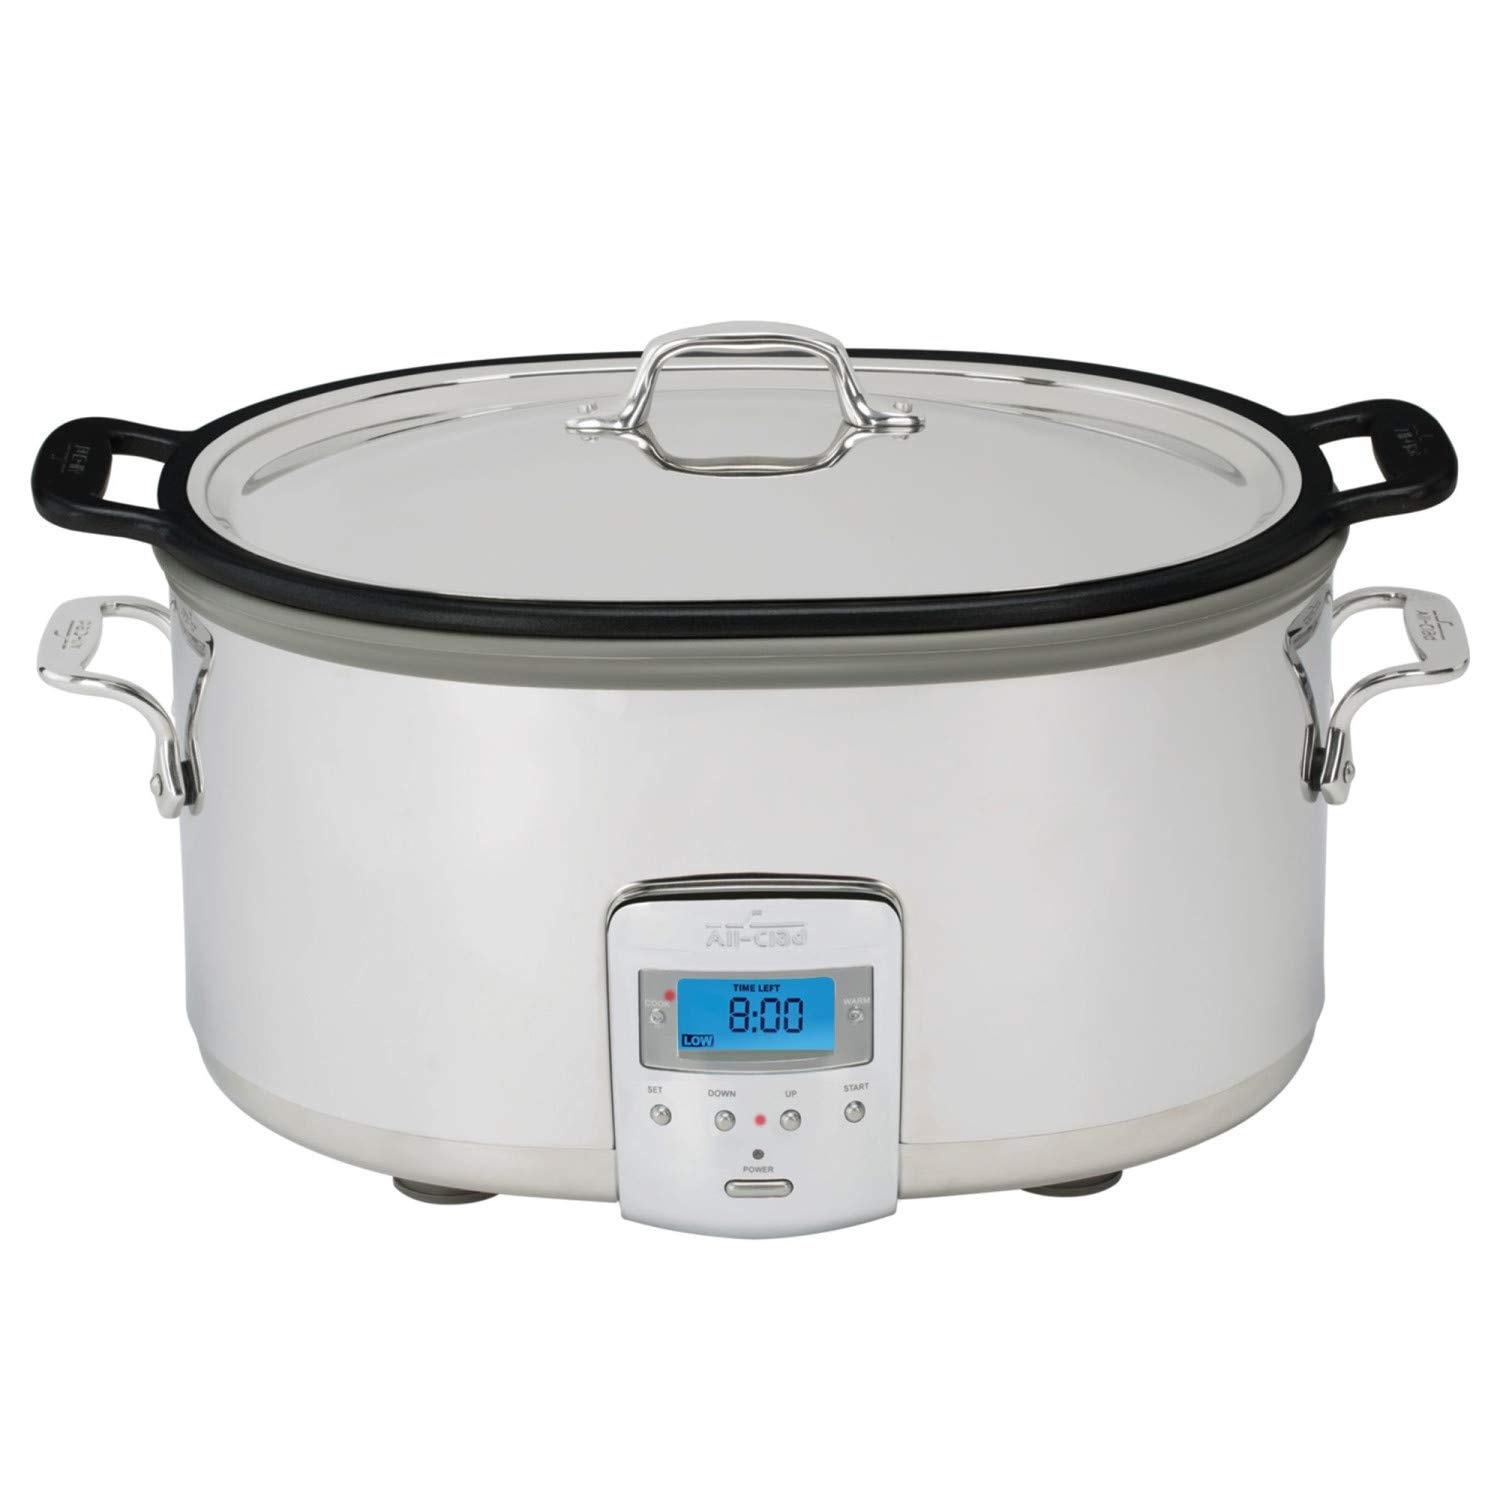 https://ak1.ostkcdn.com/images/products/is/images/direct/7ed70810532c12f0eb51498d57f5aa517380a70a/Slow-Cooker%2C-7-Quart%2C-Silver.jpg